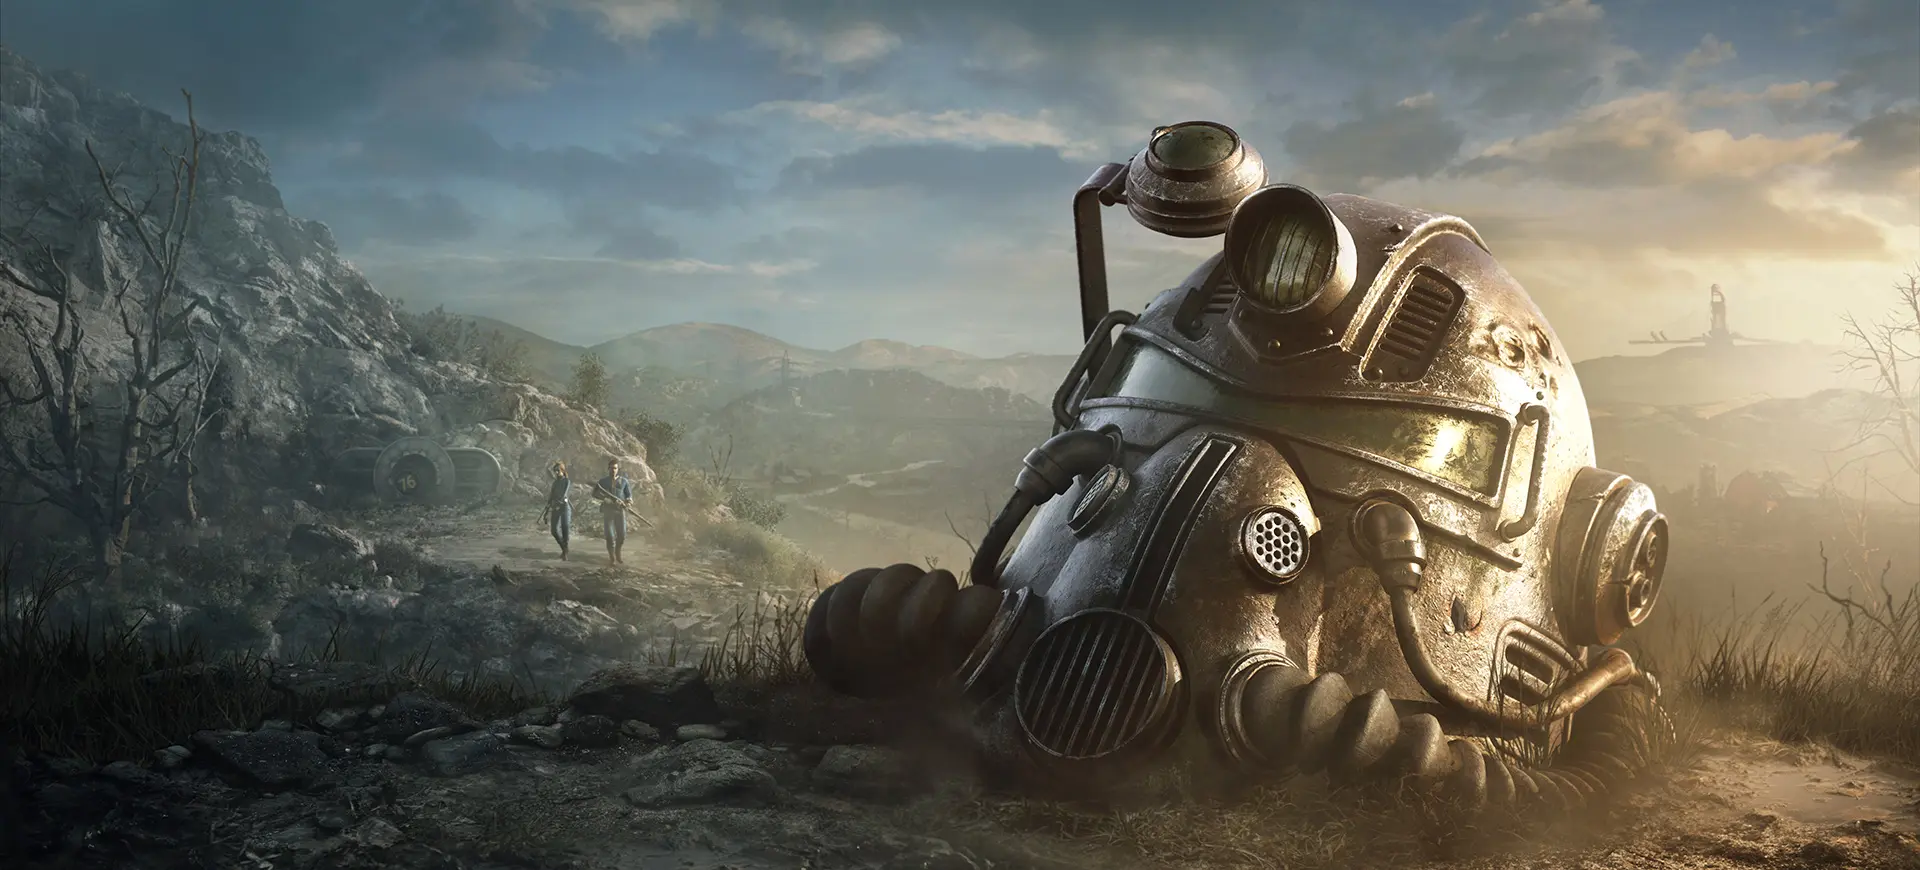 Fallout 76 says goodbye to Steam